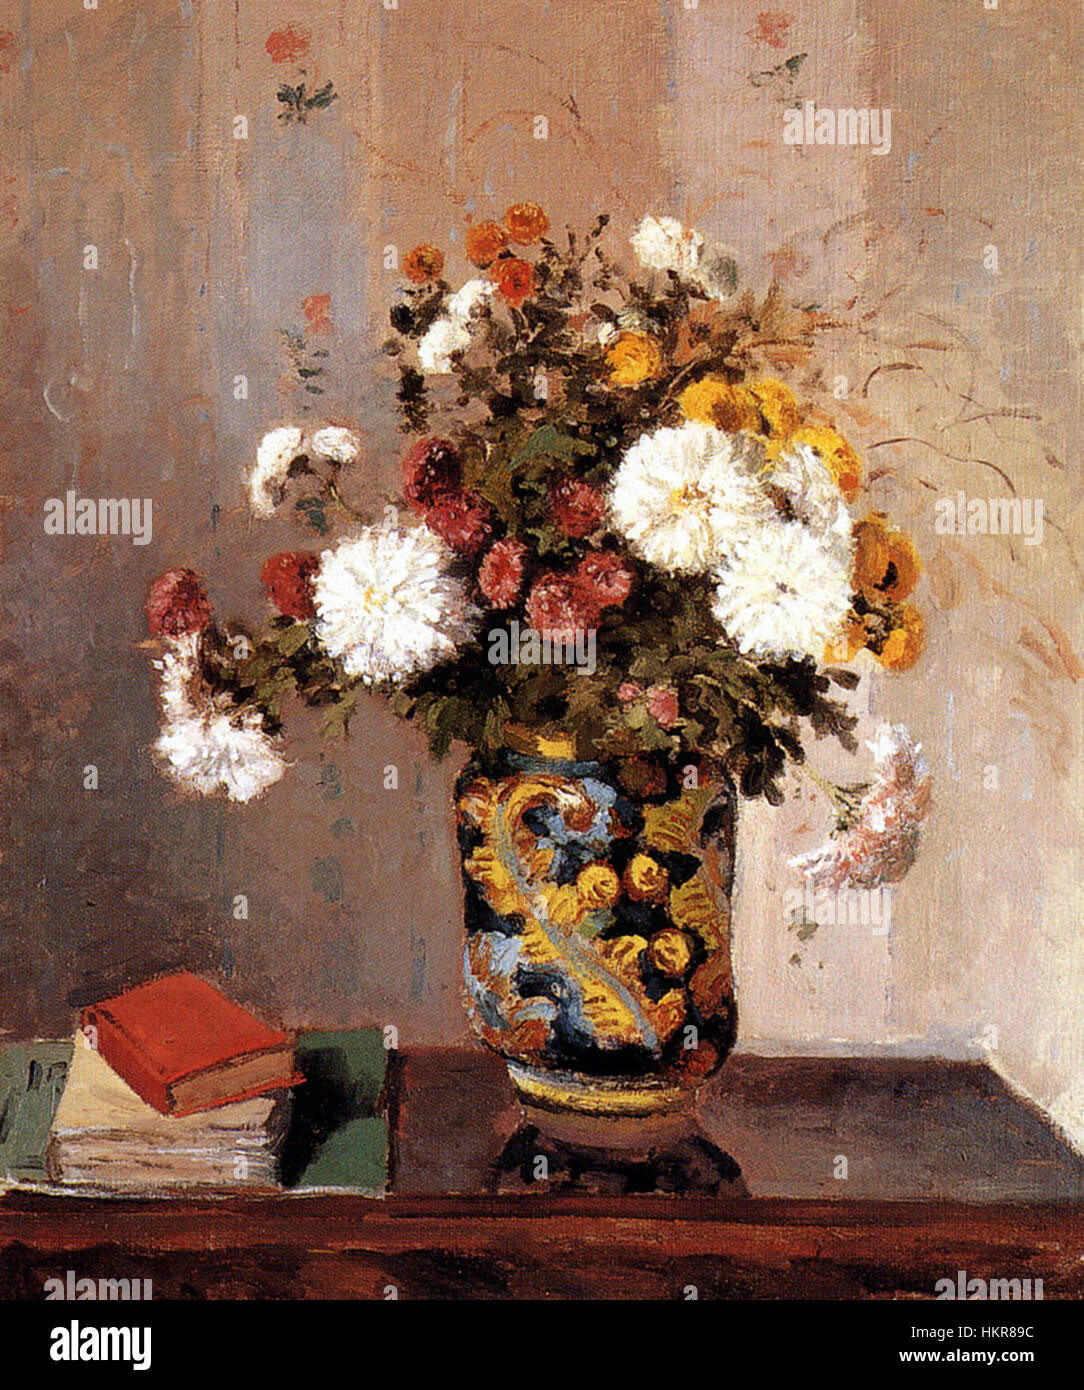 Camille Pissarro (French, 1830-1903), Chrysanthemums in a Chinese Vase, 1870 Stock Photo